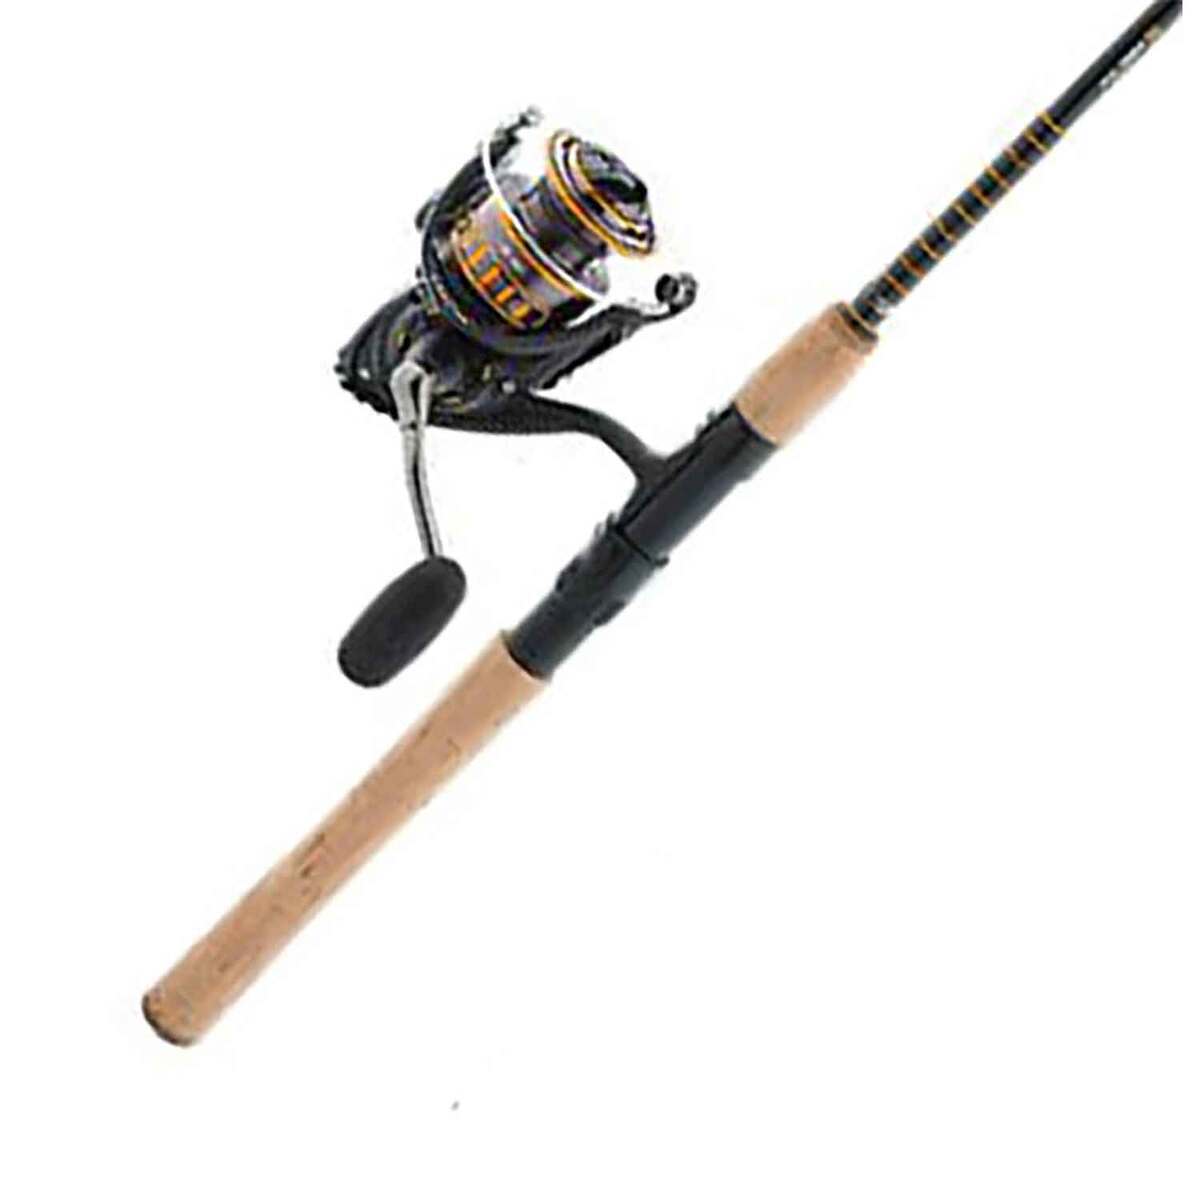 Pro Saltwater Offshore Spinning Combo 7' 1PC/ 13 BB Spinning Reel